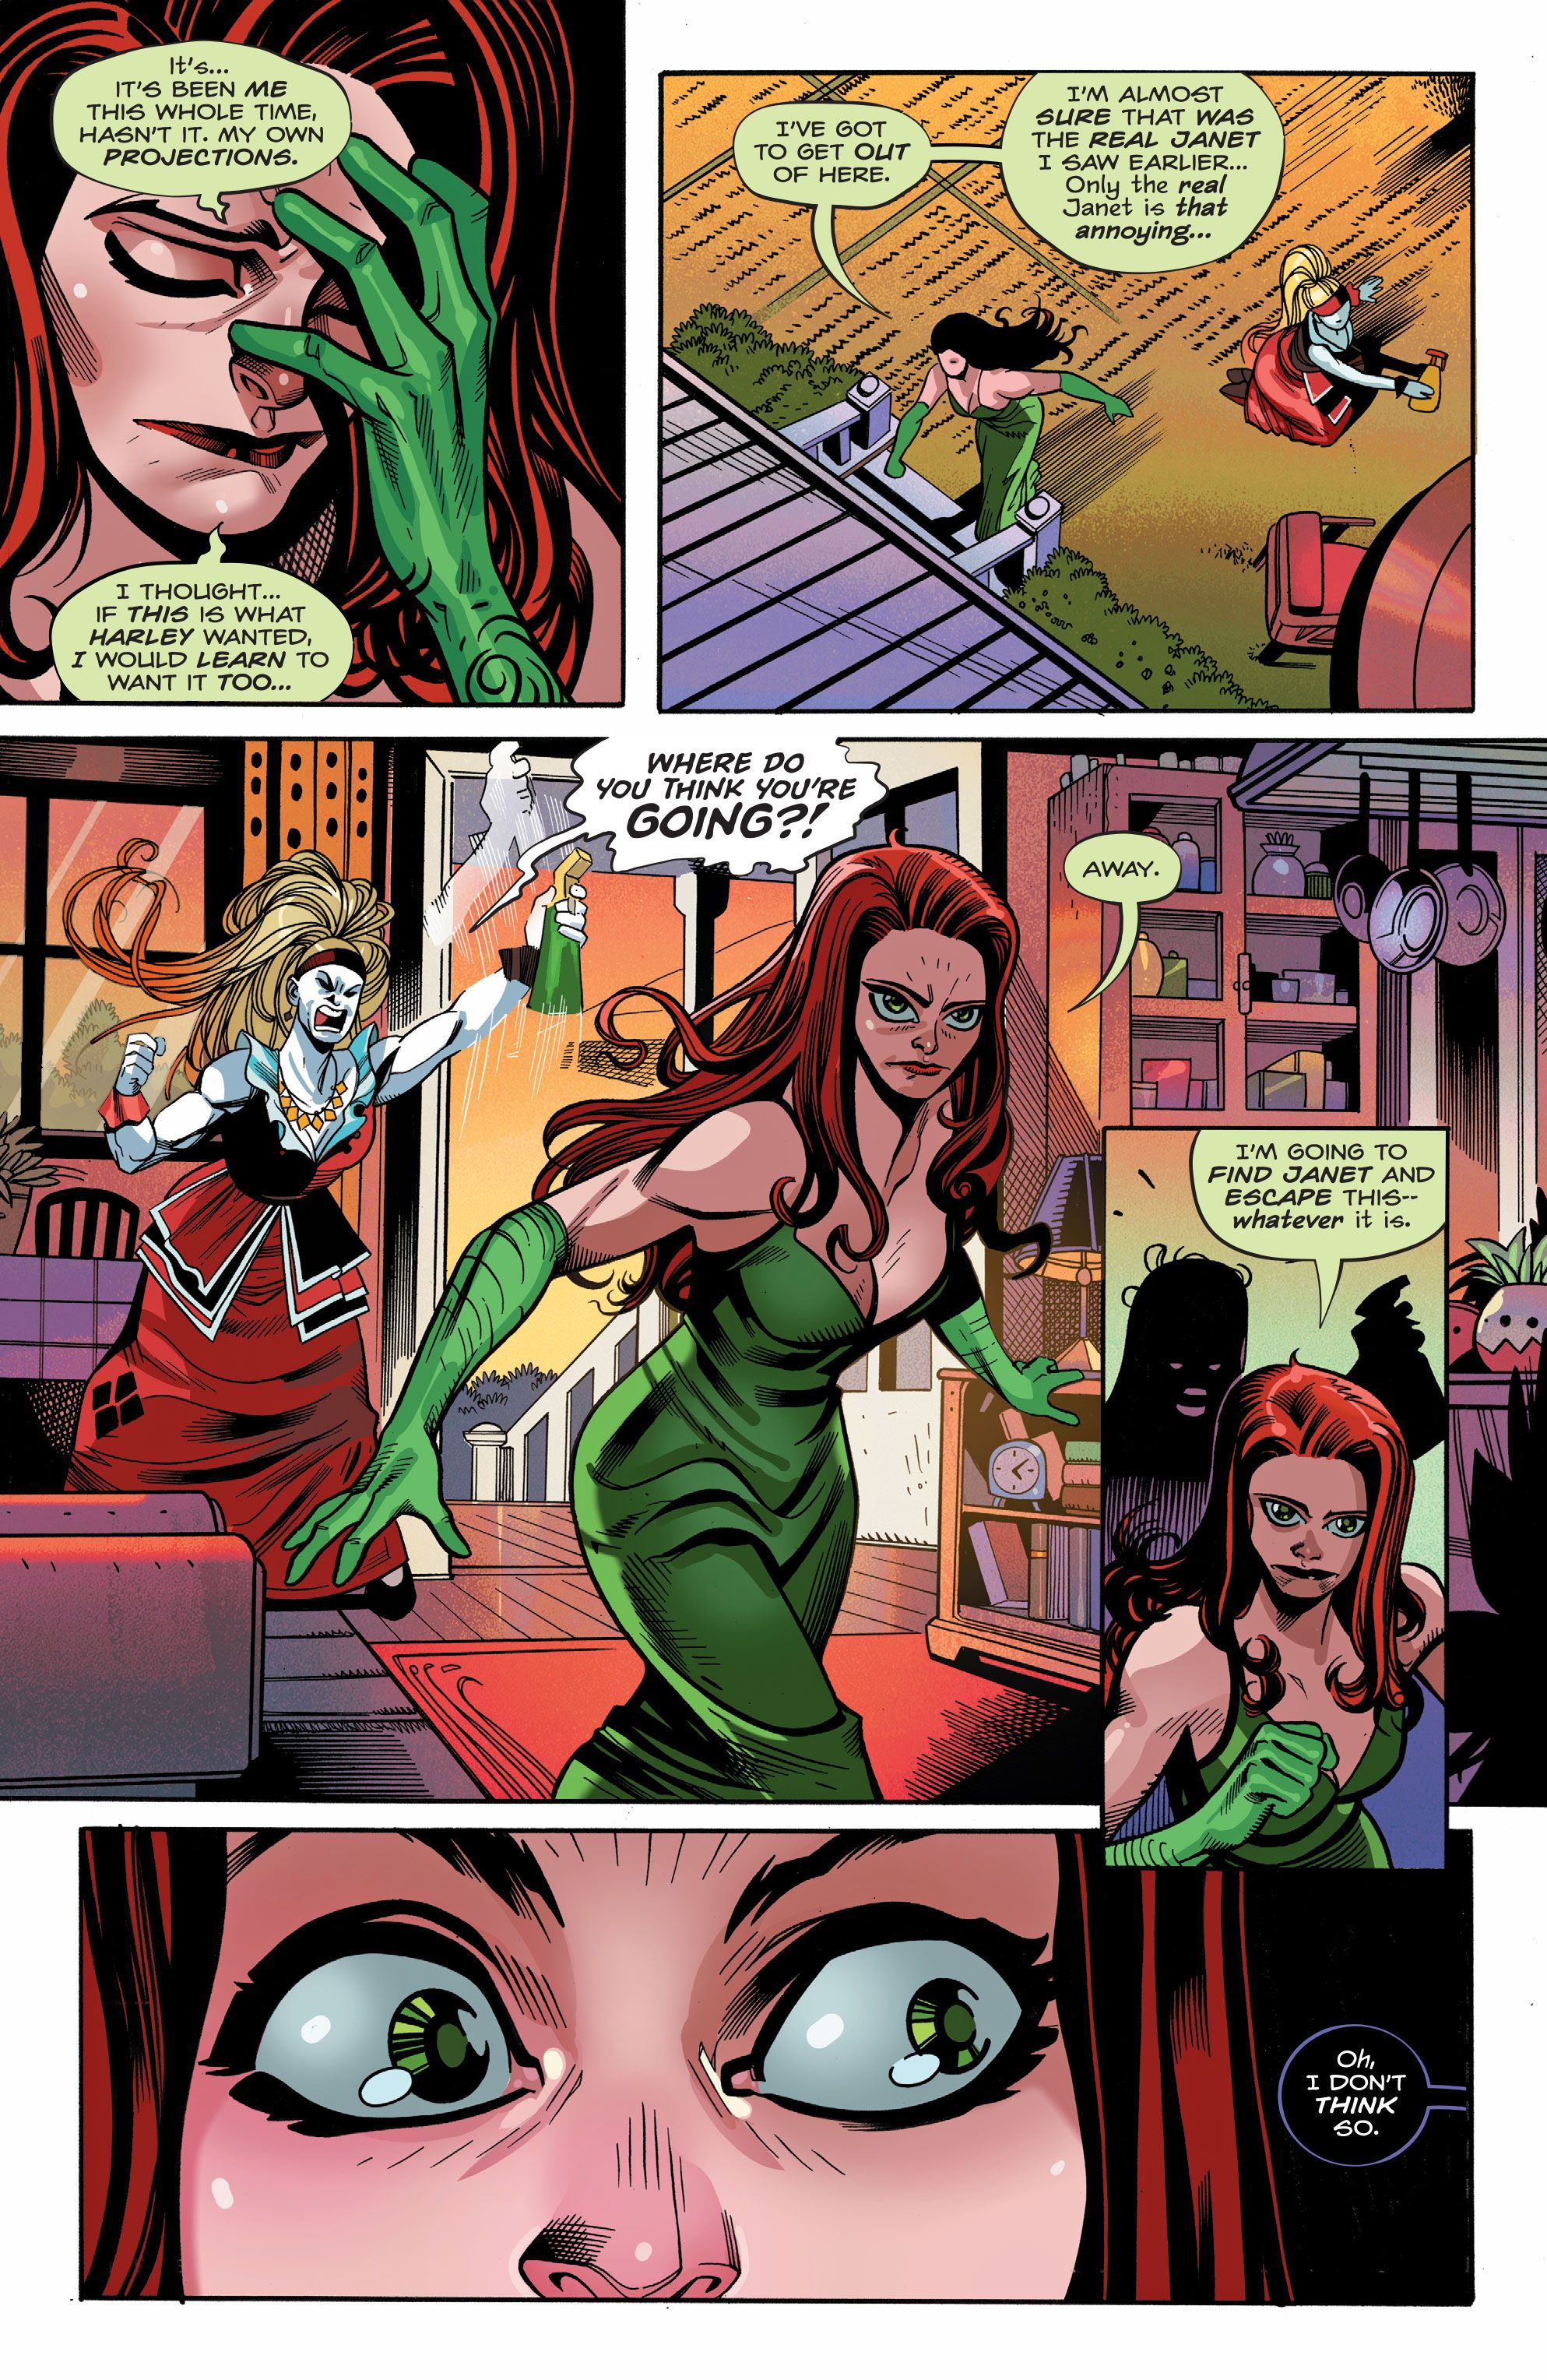 Poison Ivy storms off in Knight Terrors.